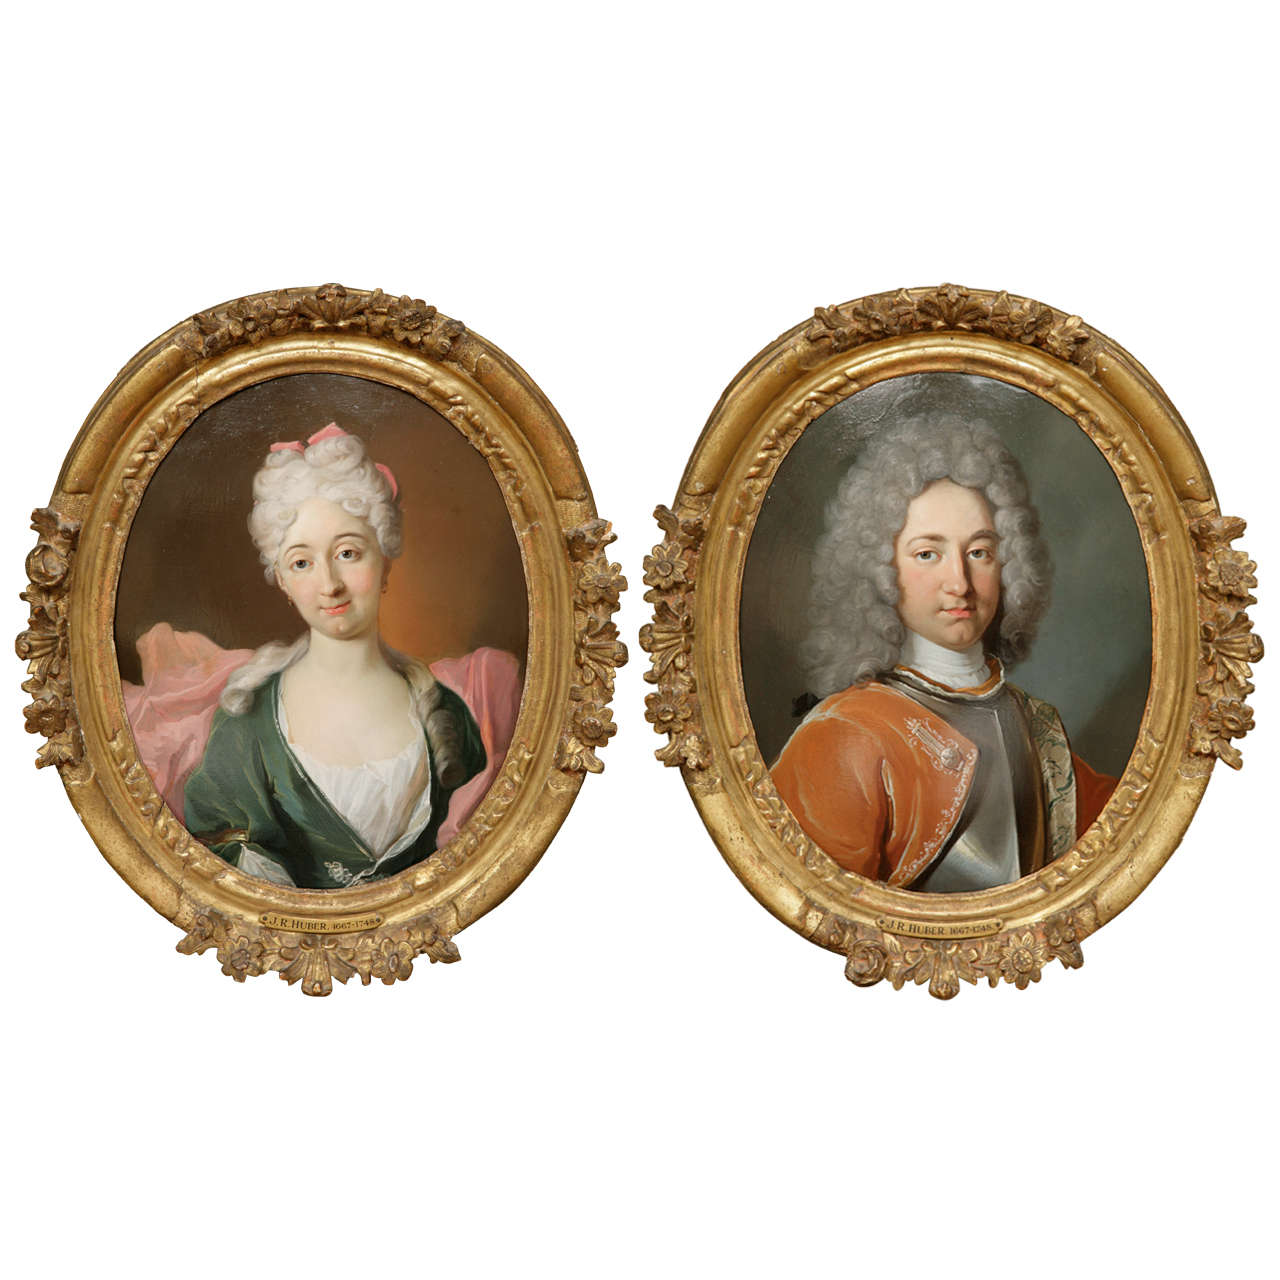 A Pair of Oval Portraits By Johann Huber Dated 1711